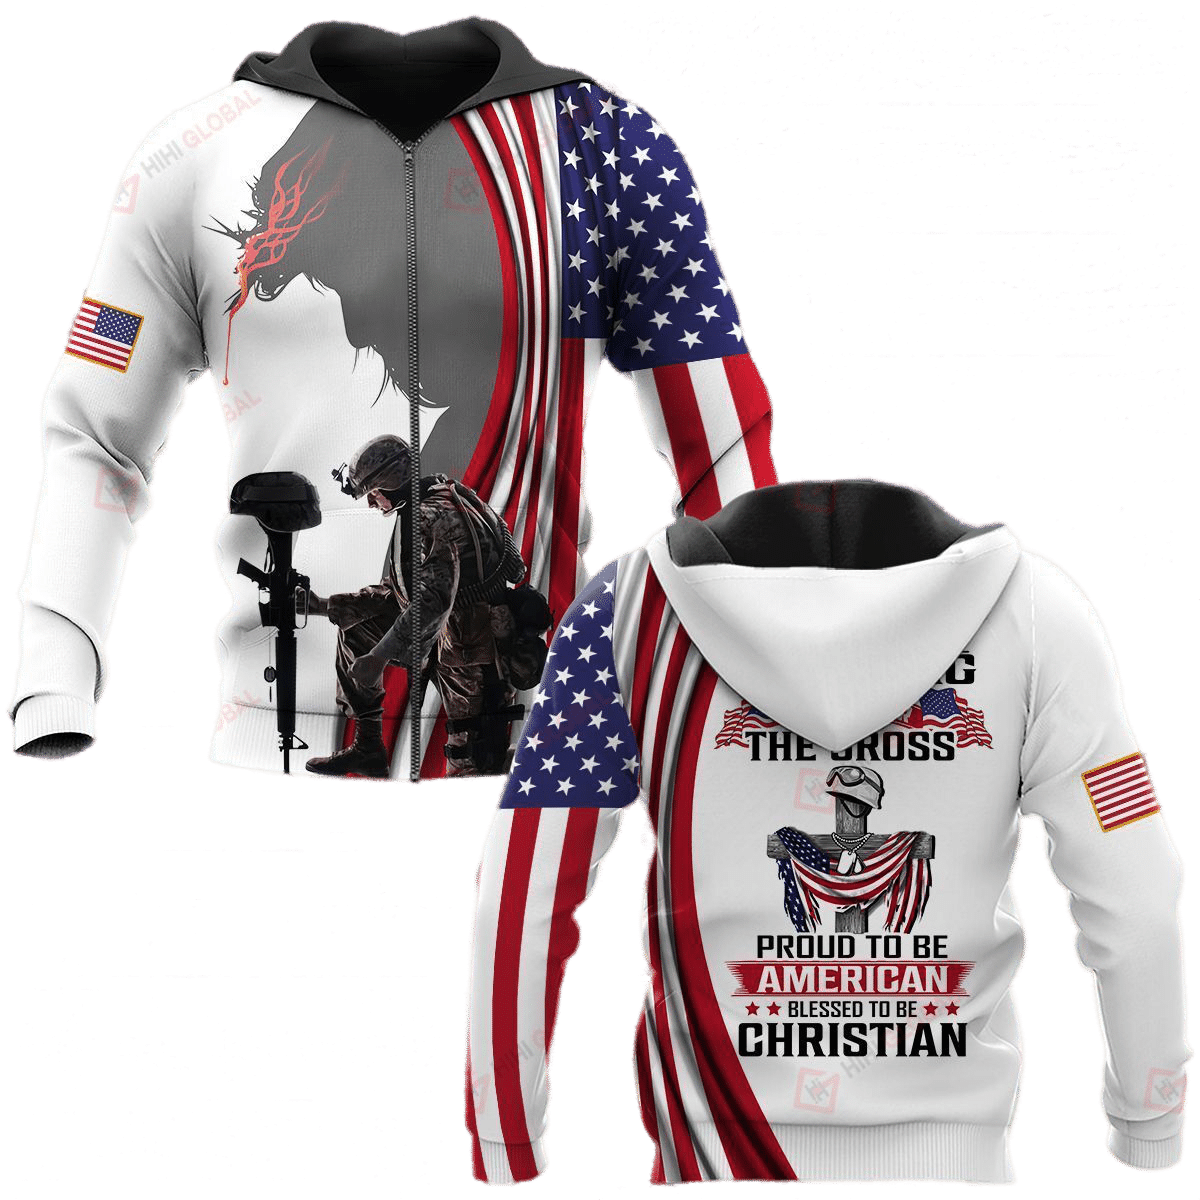 Stand For The Flag Kneel For The Cross Shirts